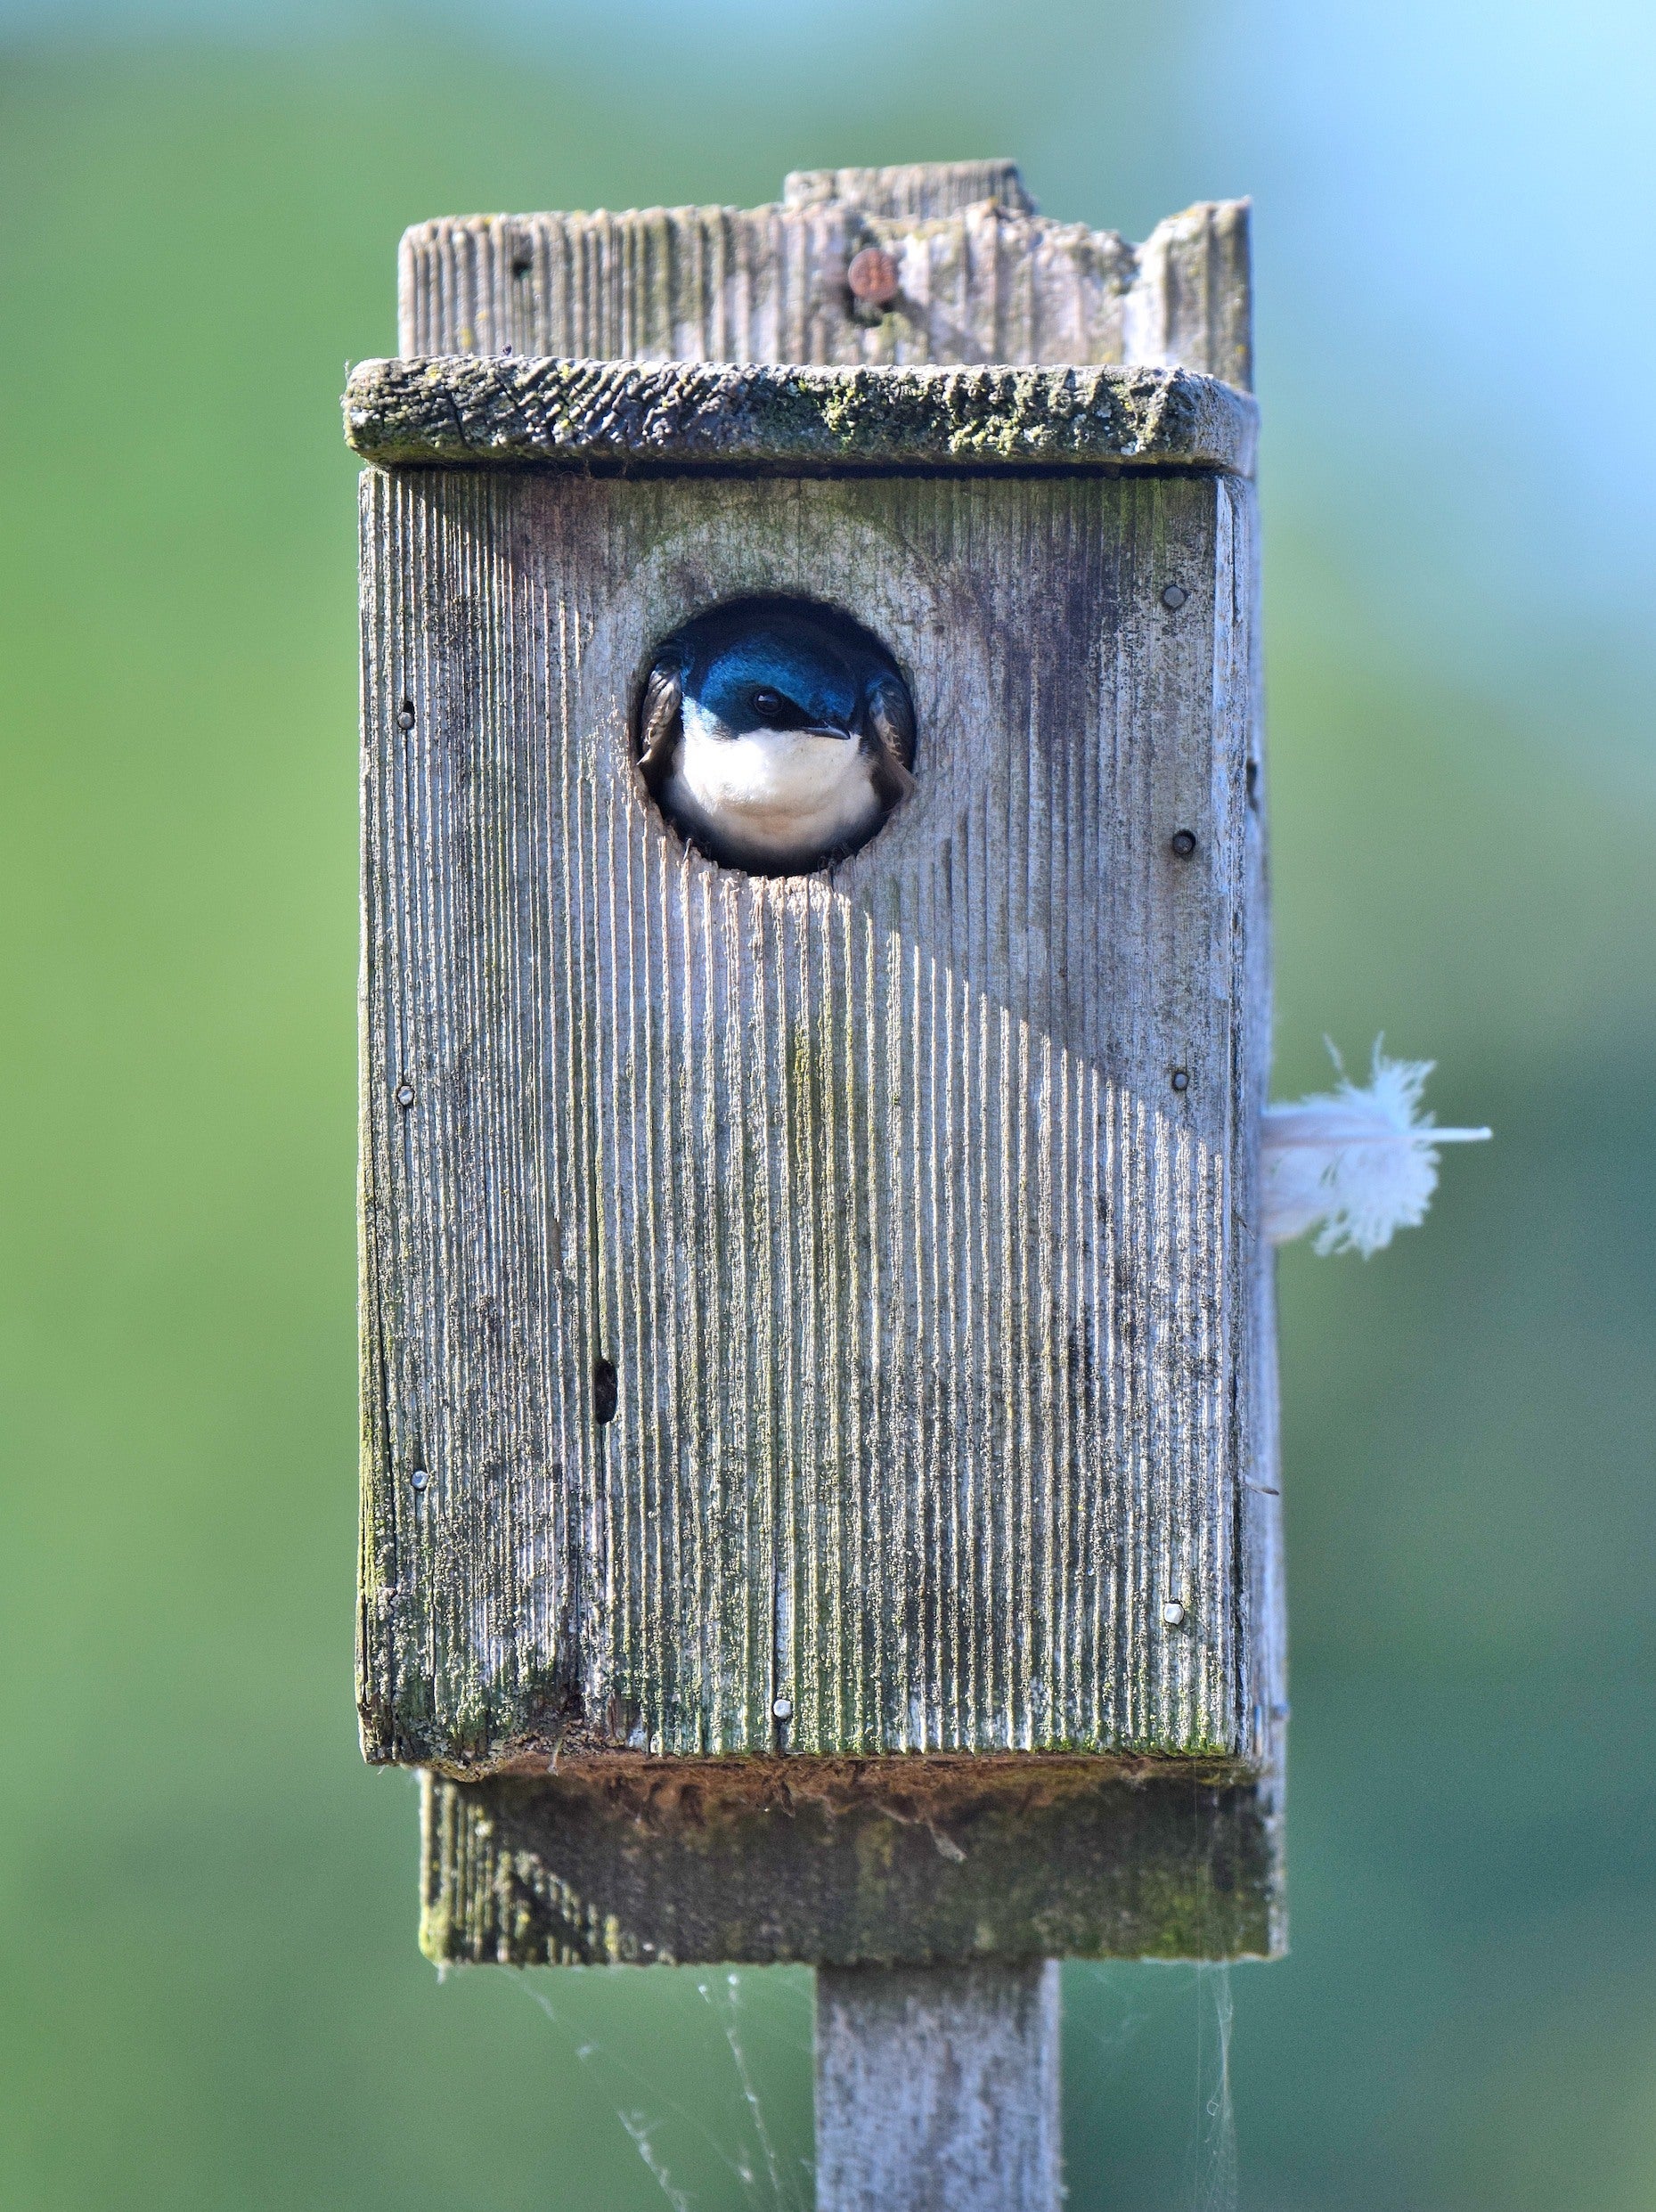 Tree swallow bird peers. out of hole in wooden bird box